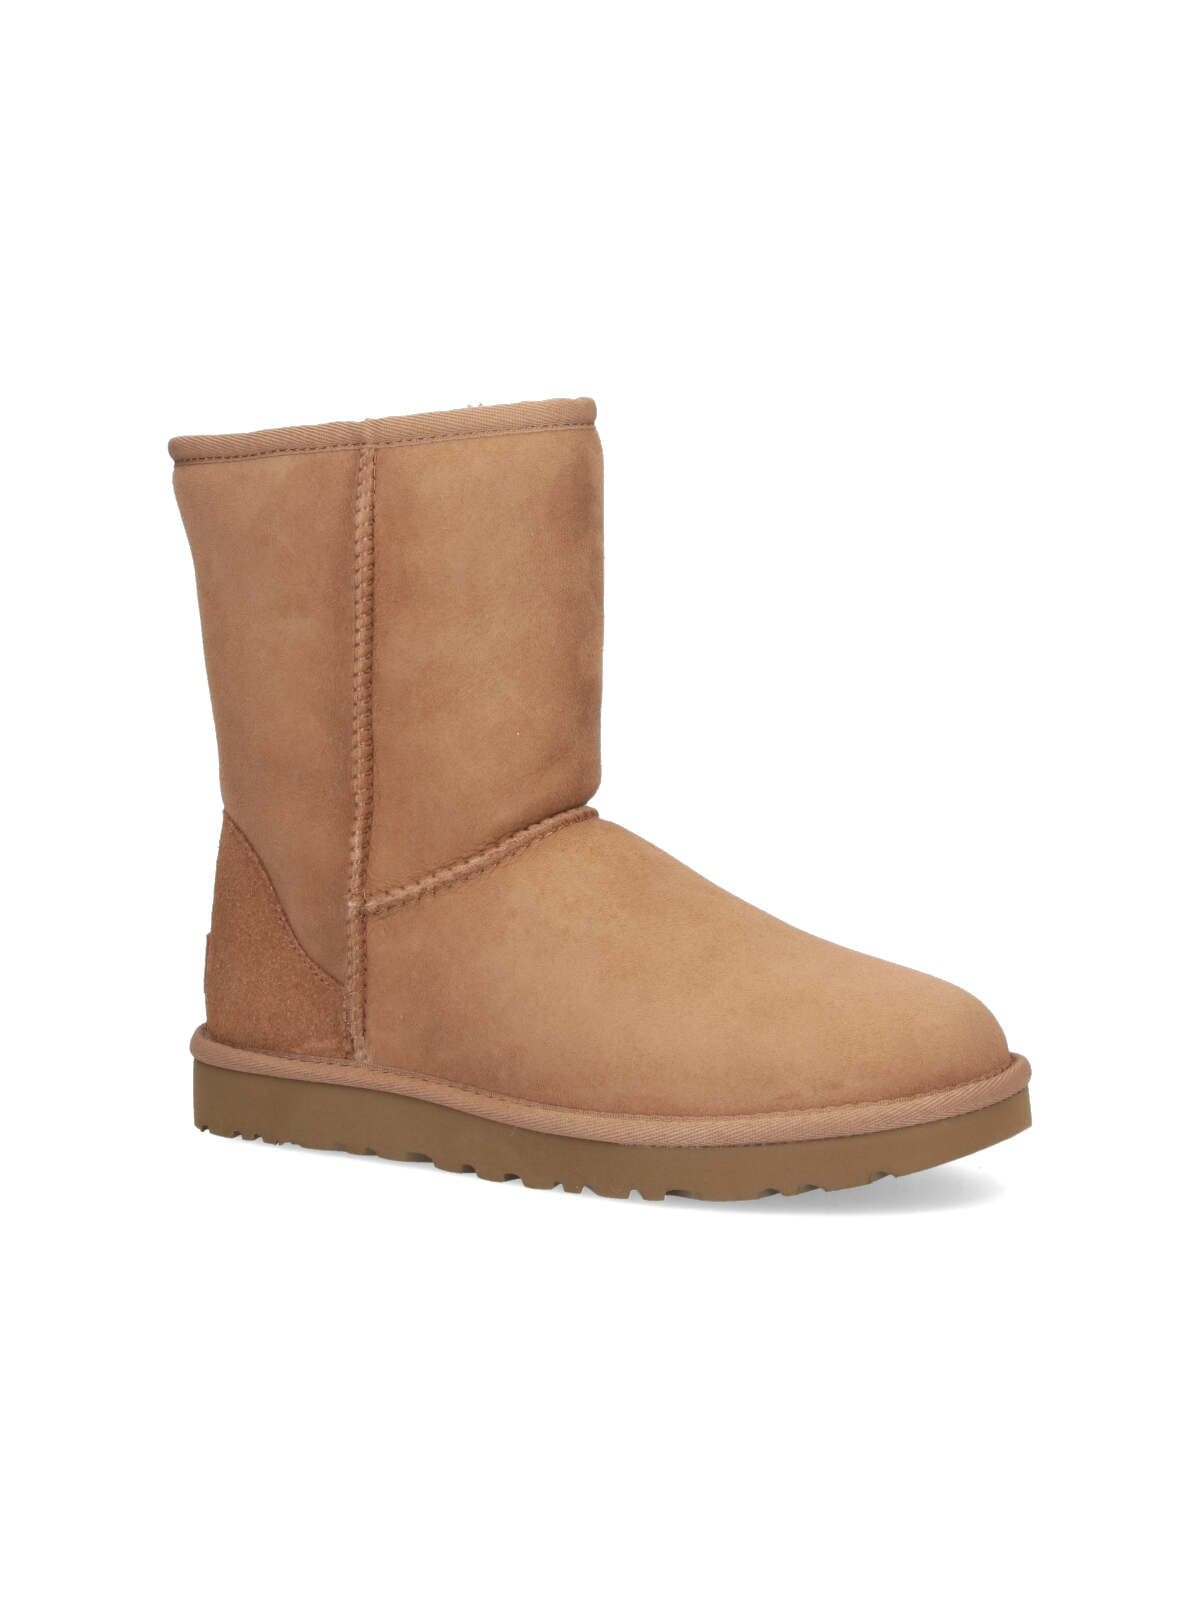 UGG Classic Short II Shearling Ankle Boots - Farfetch